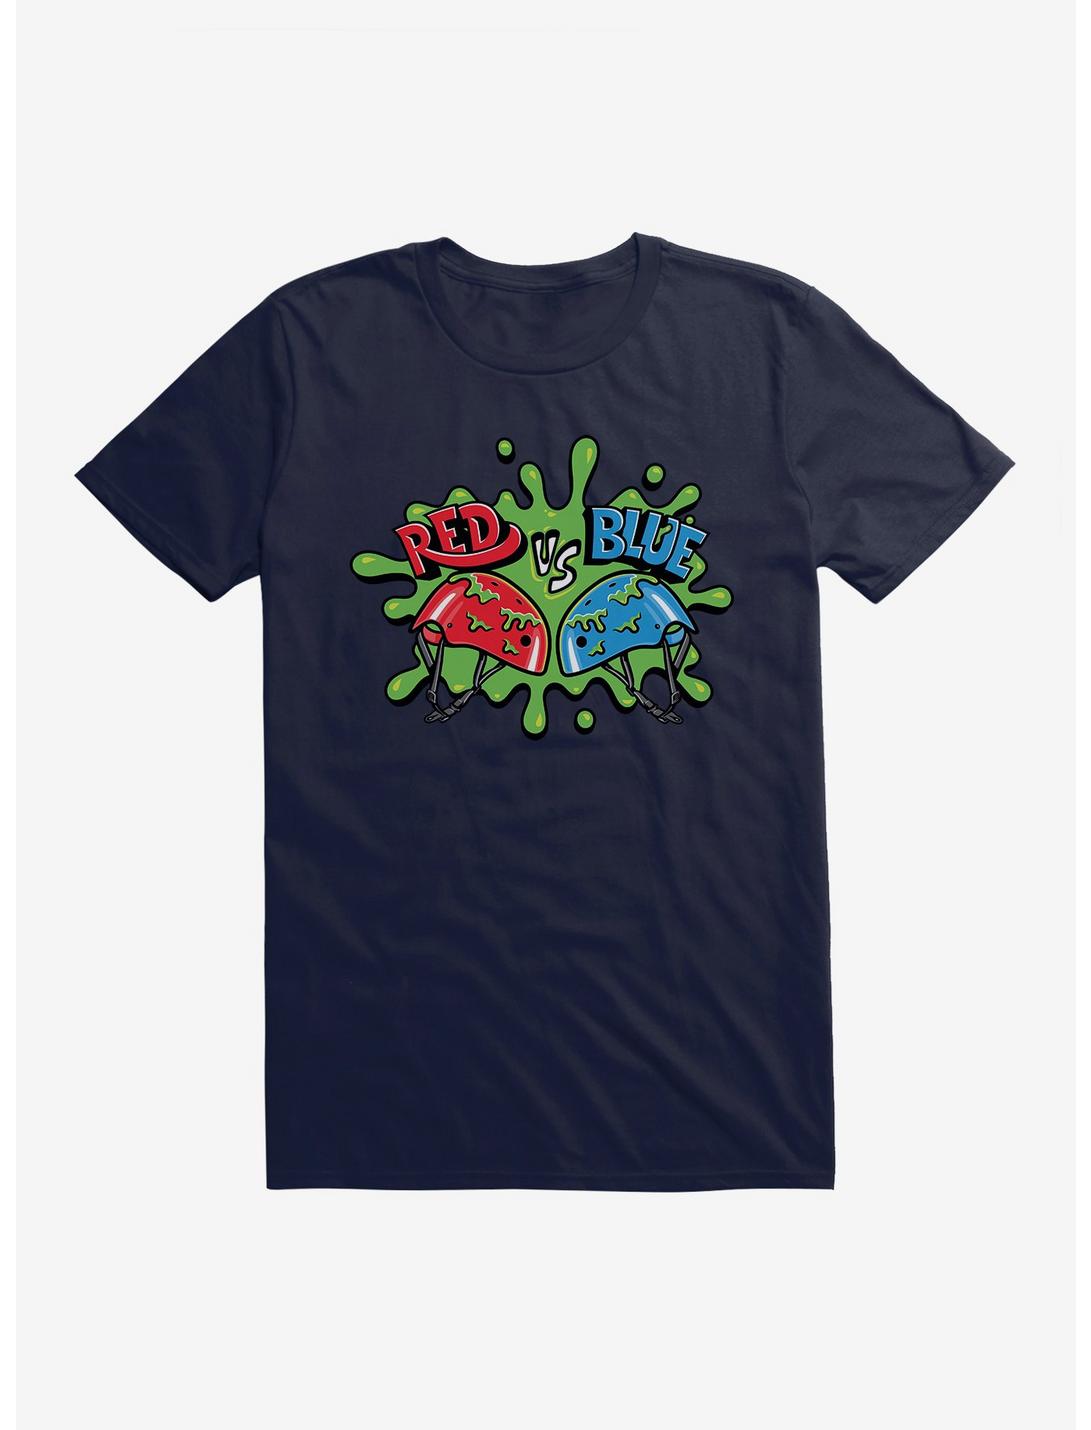 Double Dare Red Vs Blue T-Shirt, , hi-res